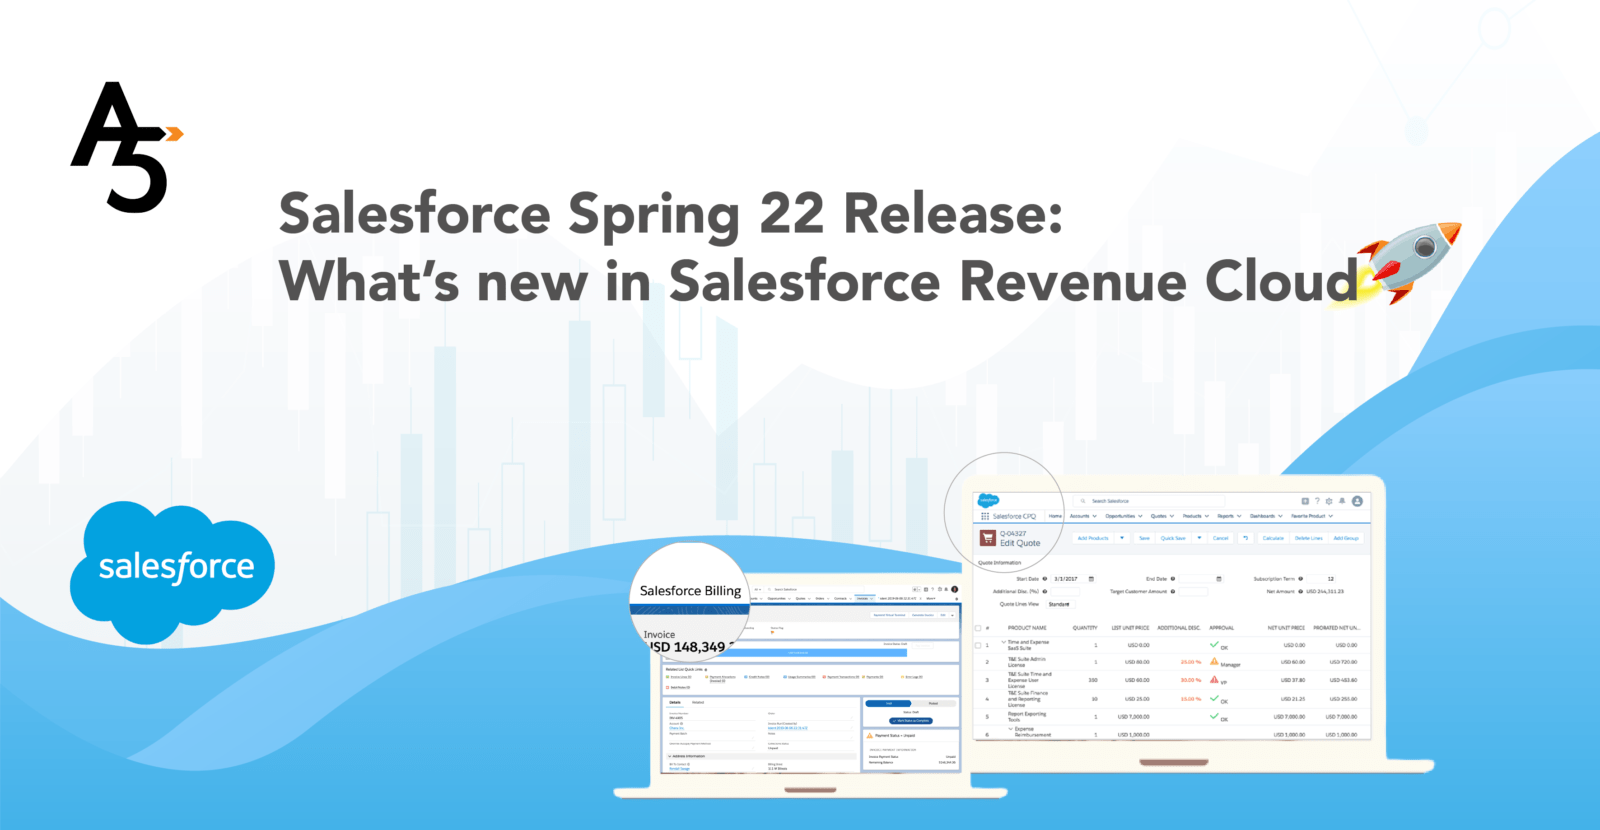 Salesforce Spring 22 Release: What's new in Salesforce Revenue Cloud